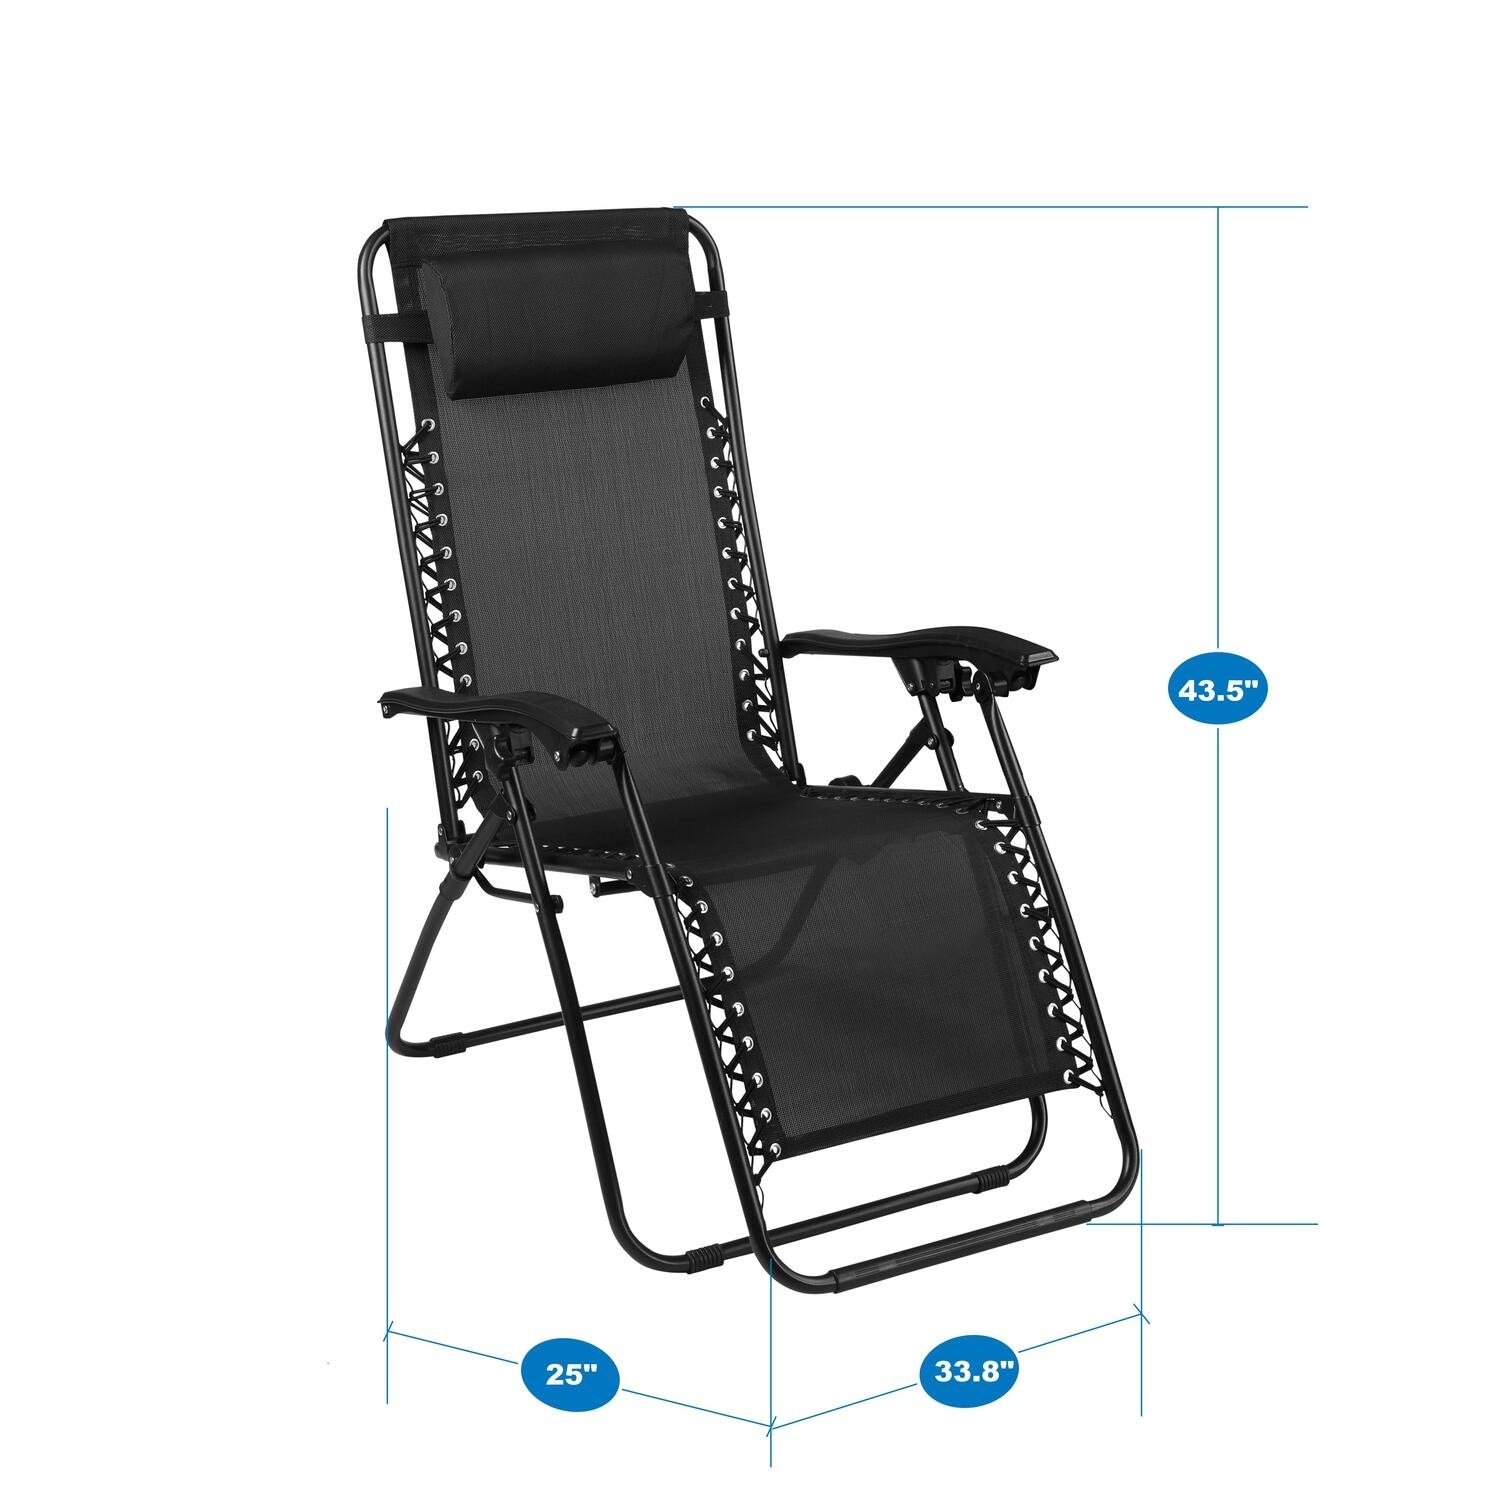 Zero Gravity Chairs Set of 4 Pool Lounge Chair Zero Gravity Recliner Zero Gravity Lounge Chair Antigravity Chairs with Headrest Grey - image 4 of 6